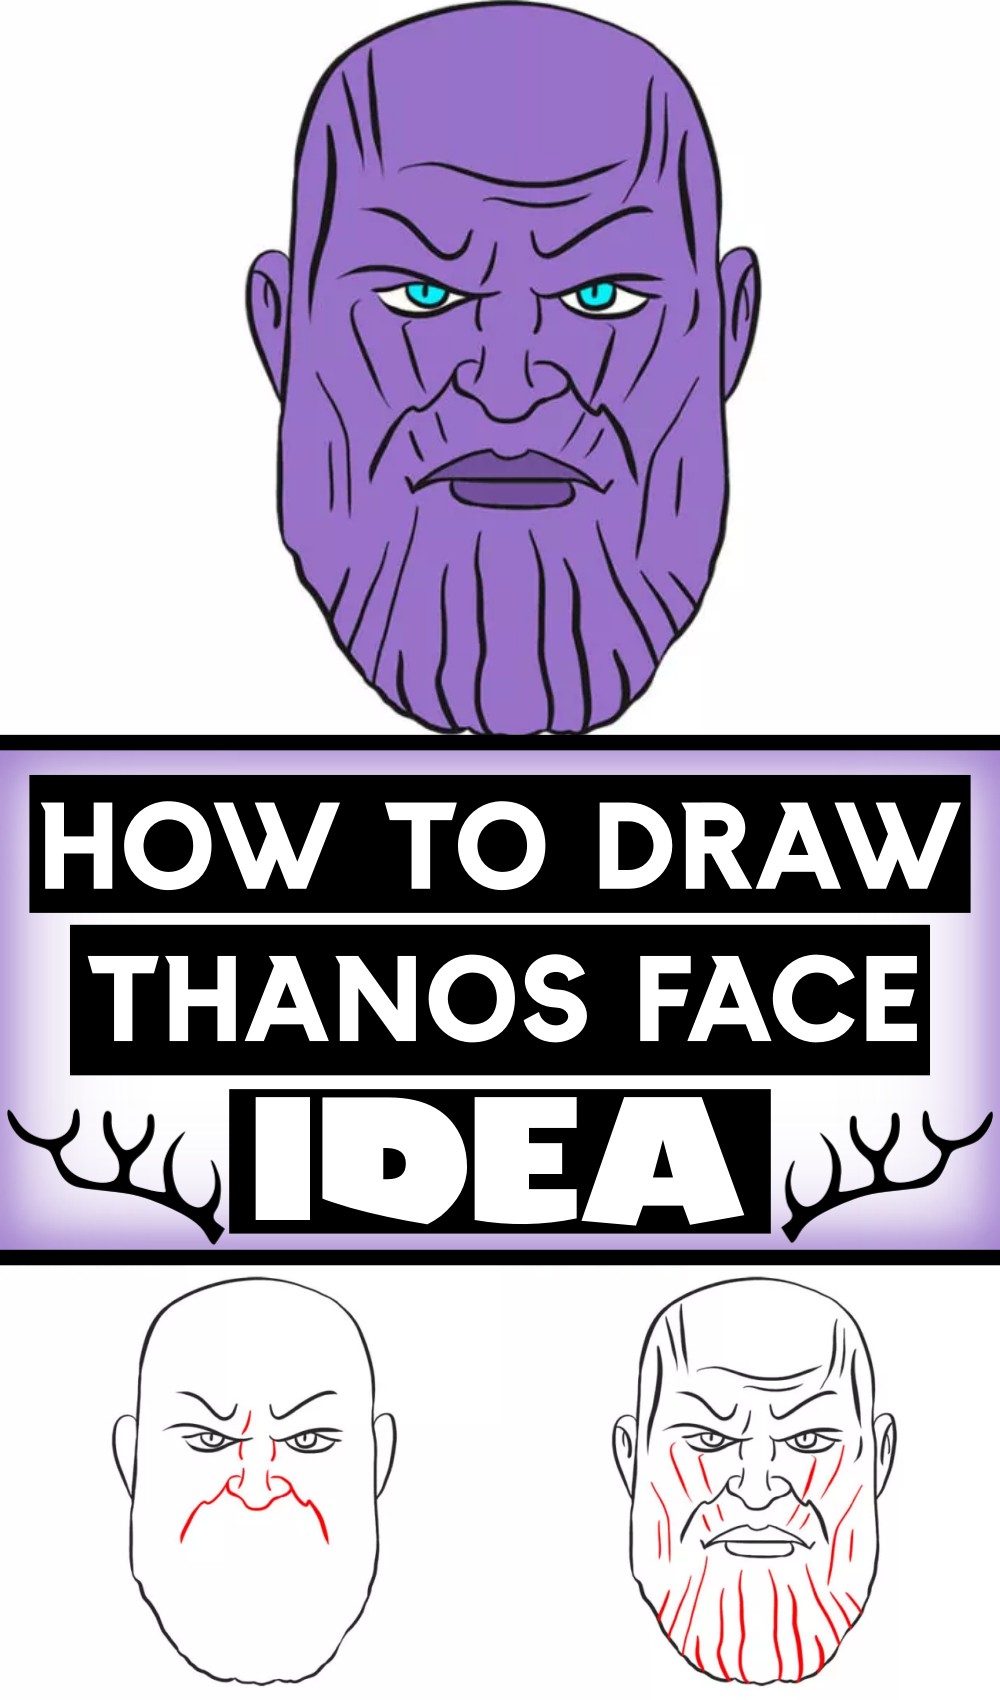 How To Draw Thanos Face